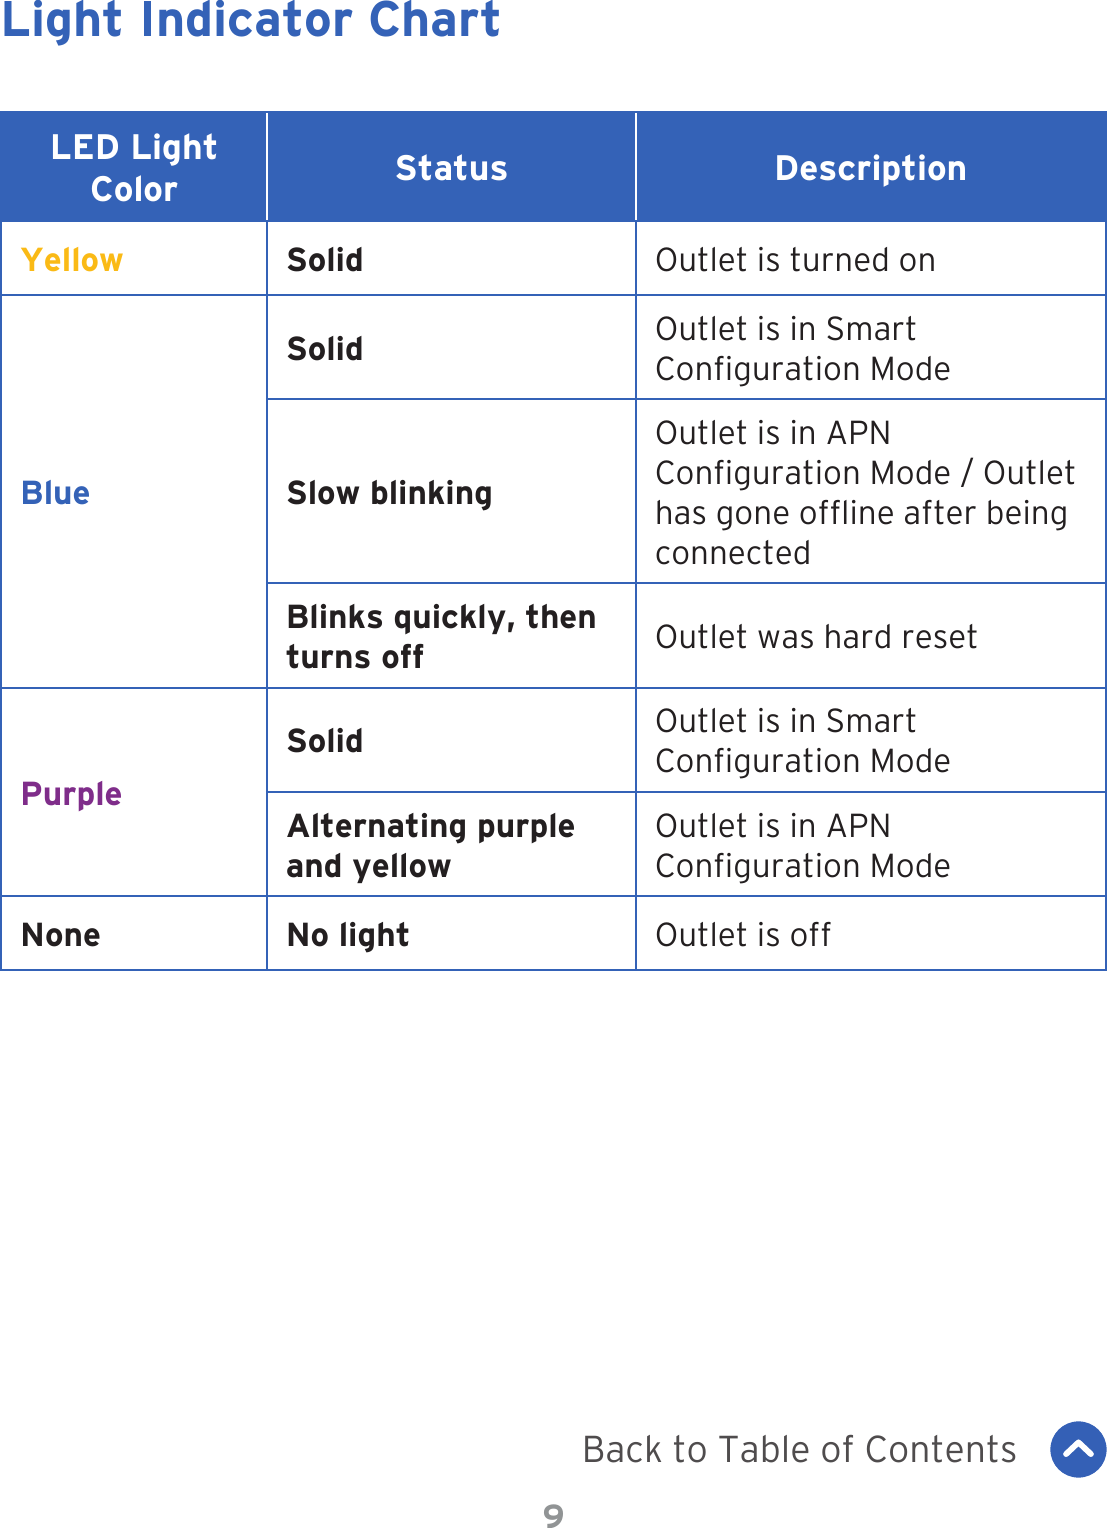 9Light Indicator ChartLED Light Color Status DescriptionYellow Solid Outlet is turned onBlueSolid Outlet is in Smart Conguration ModeSlow blinkingOutlet is in APN Conguration Mode / Outlet has gone ofine after being connectedBlinks quickly, then turns off Outlet was hard reset PurpleSolid Outlet is in Smart Conguration ModeAlternating purple and yellowOutlet is in APN Conguration ModeNone No light Outlet is off Back to Table of Contents